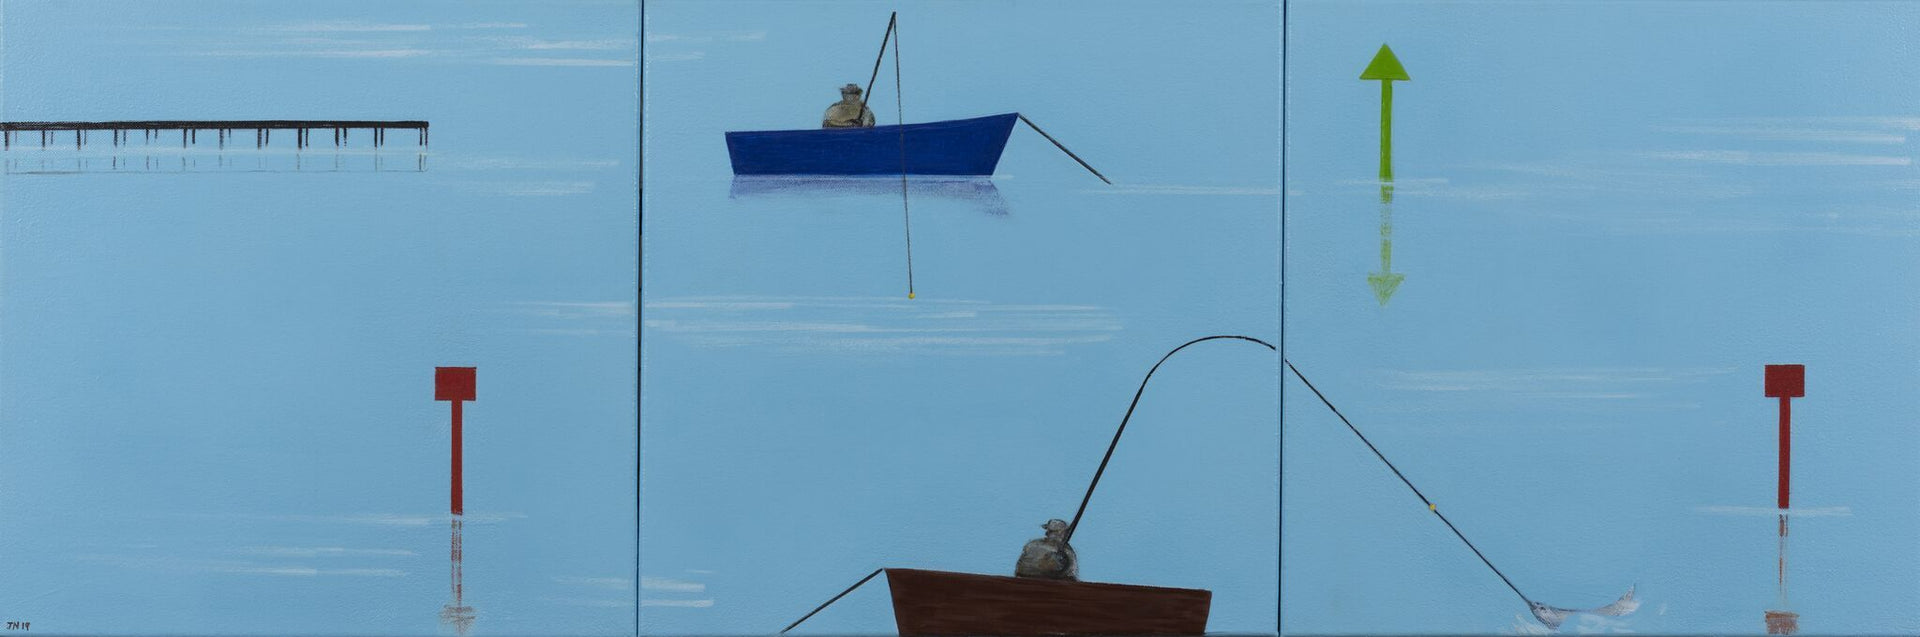 SOLD Jill Noble, Where the Whiting Are, 2019